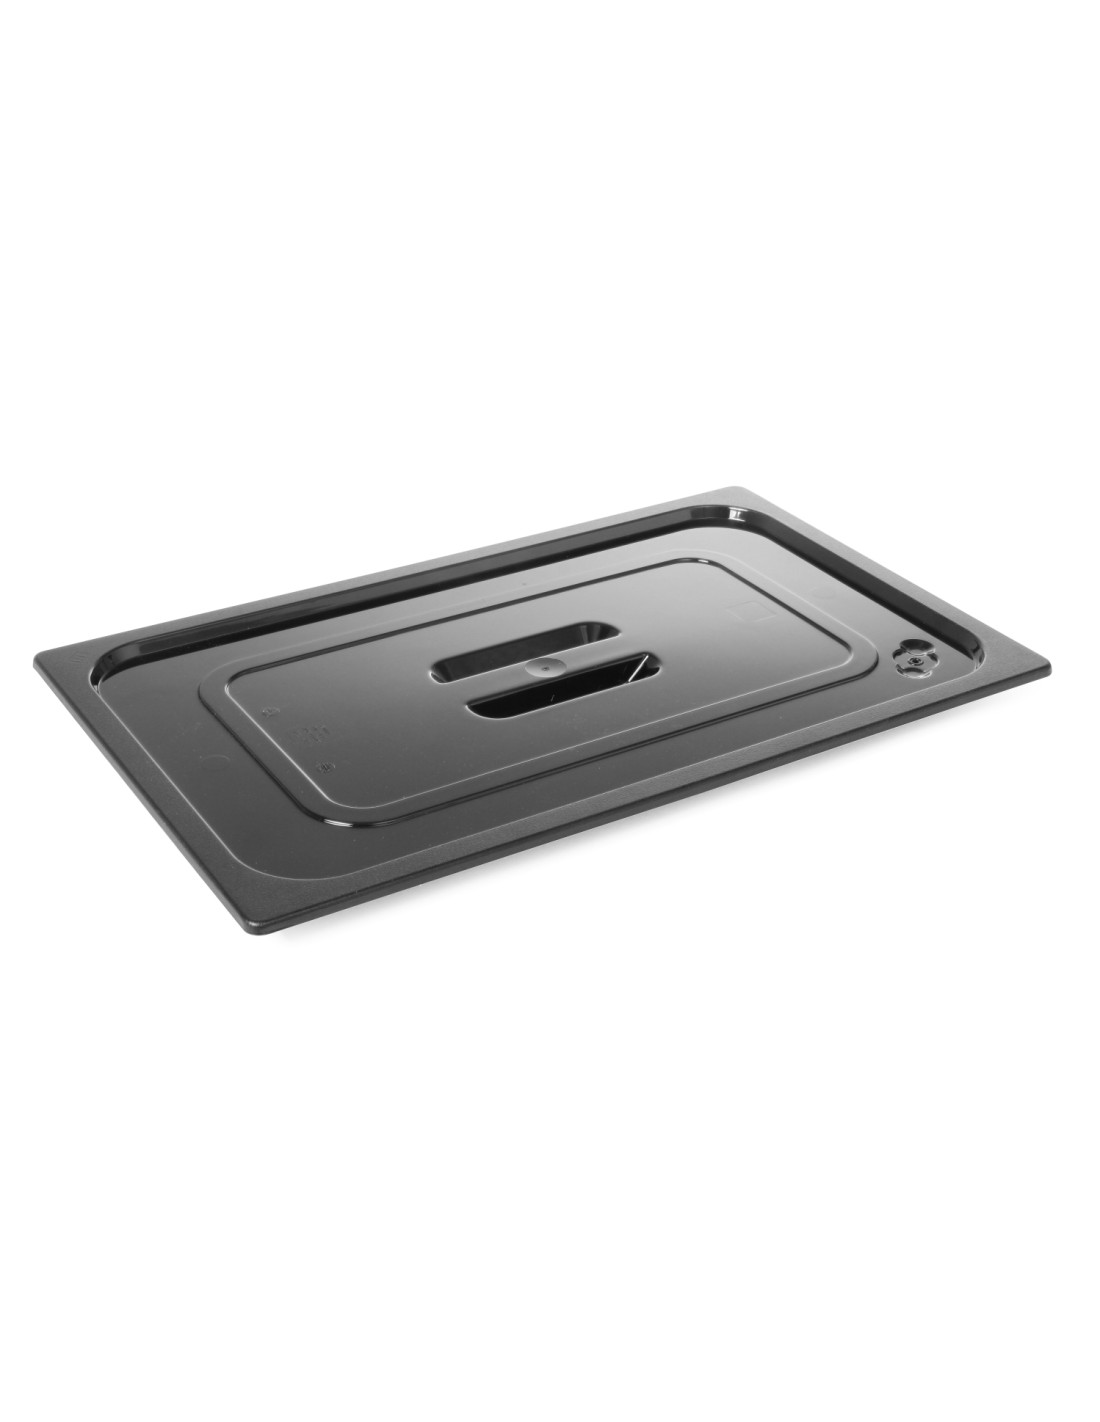 Lid for GN 1/1 trays - In black polycarbonate - mm 530 x 325